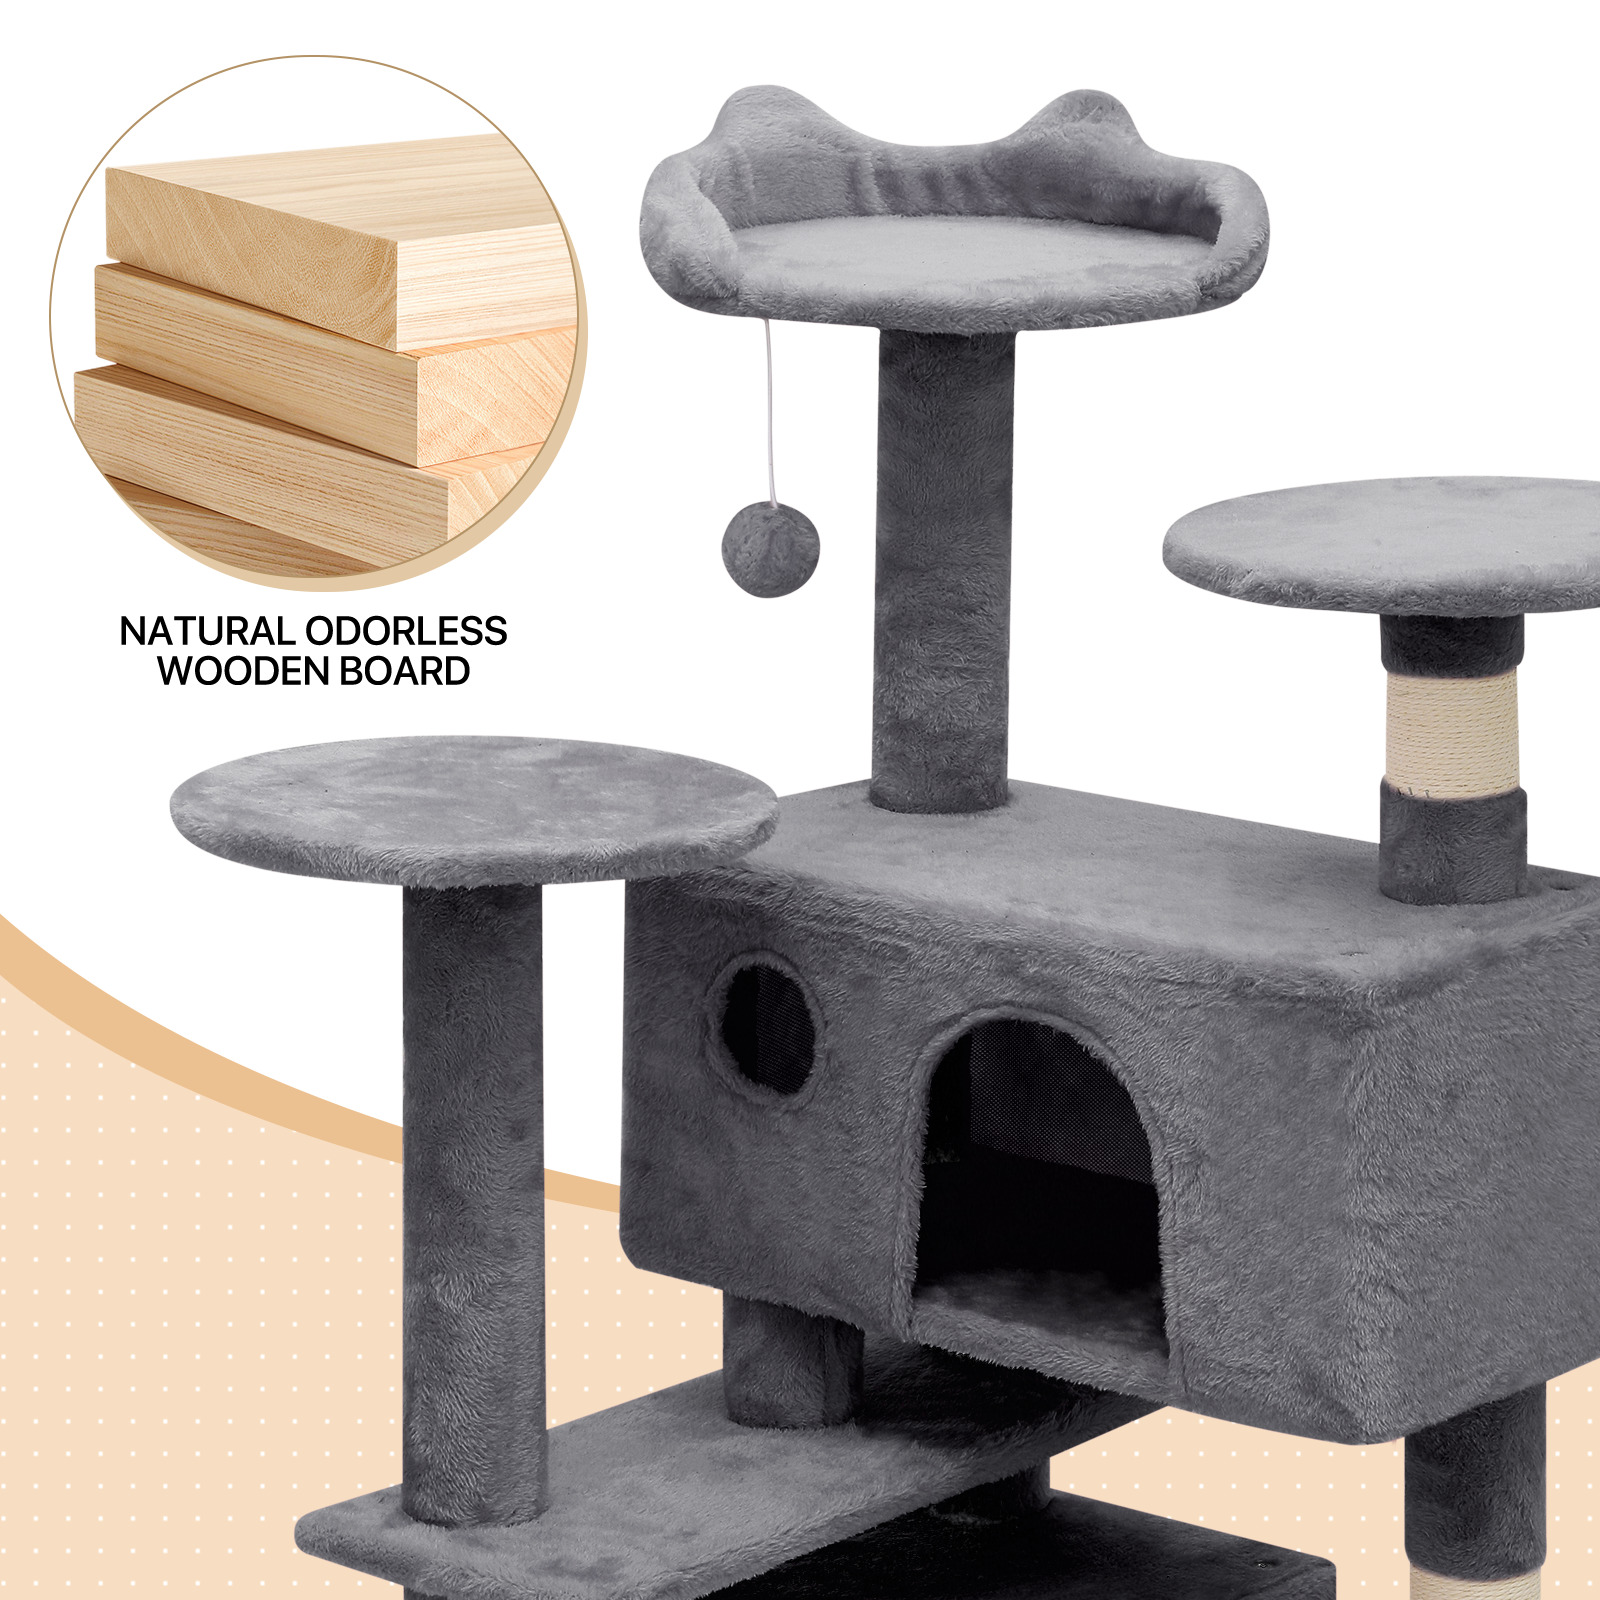 thinkstar Cat Tree Cat Tower Kitten Playing Condo House Multi-Level Playing House For Rest